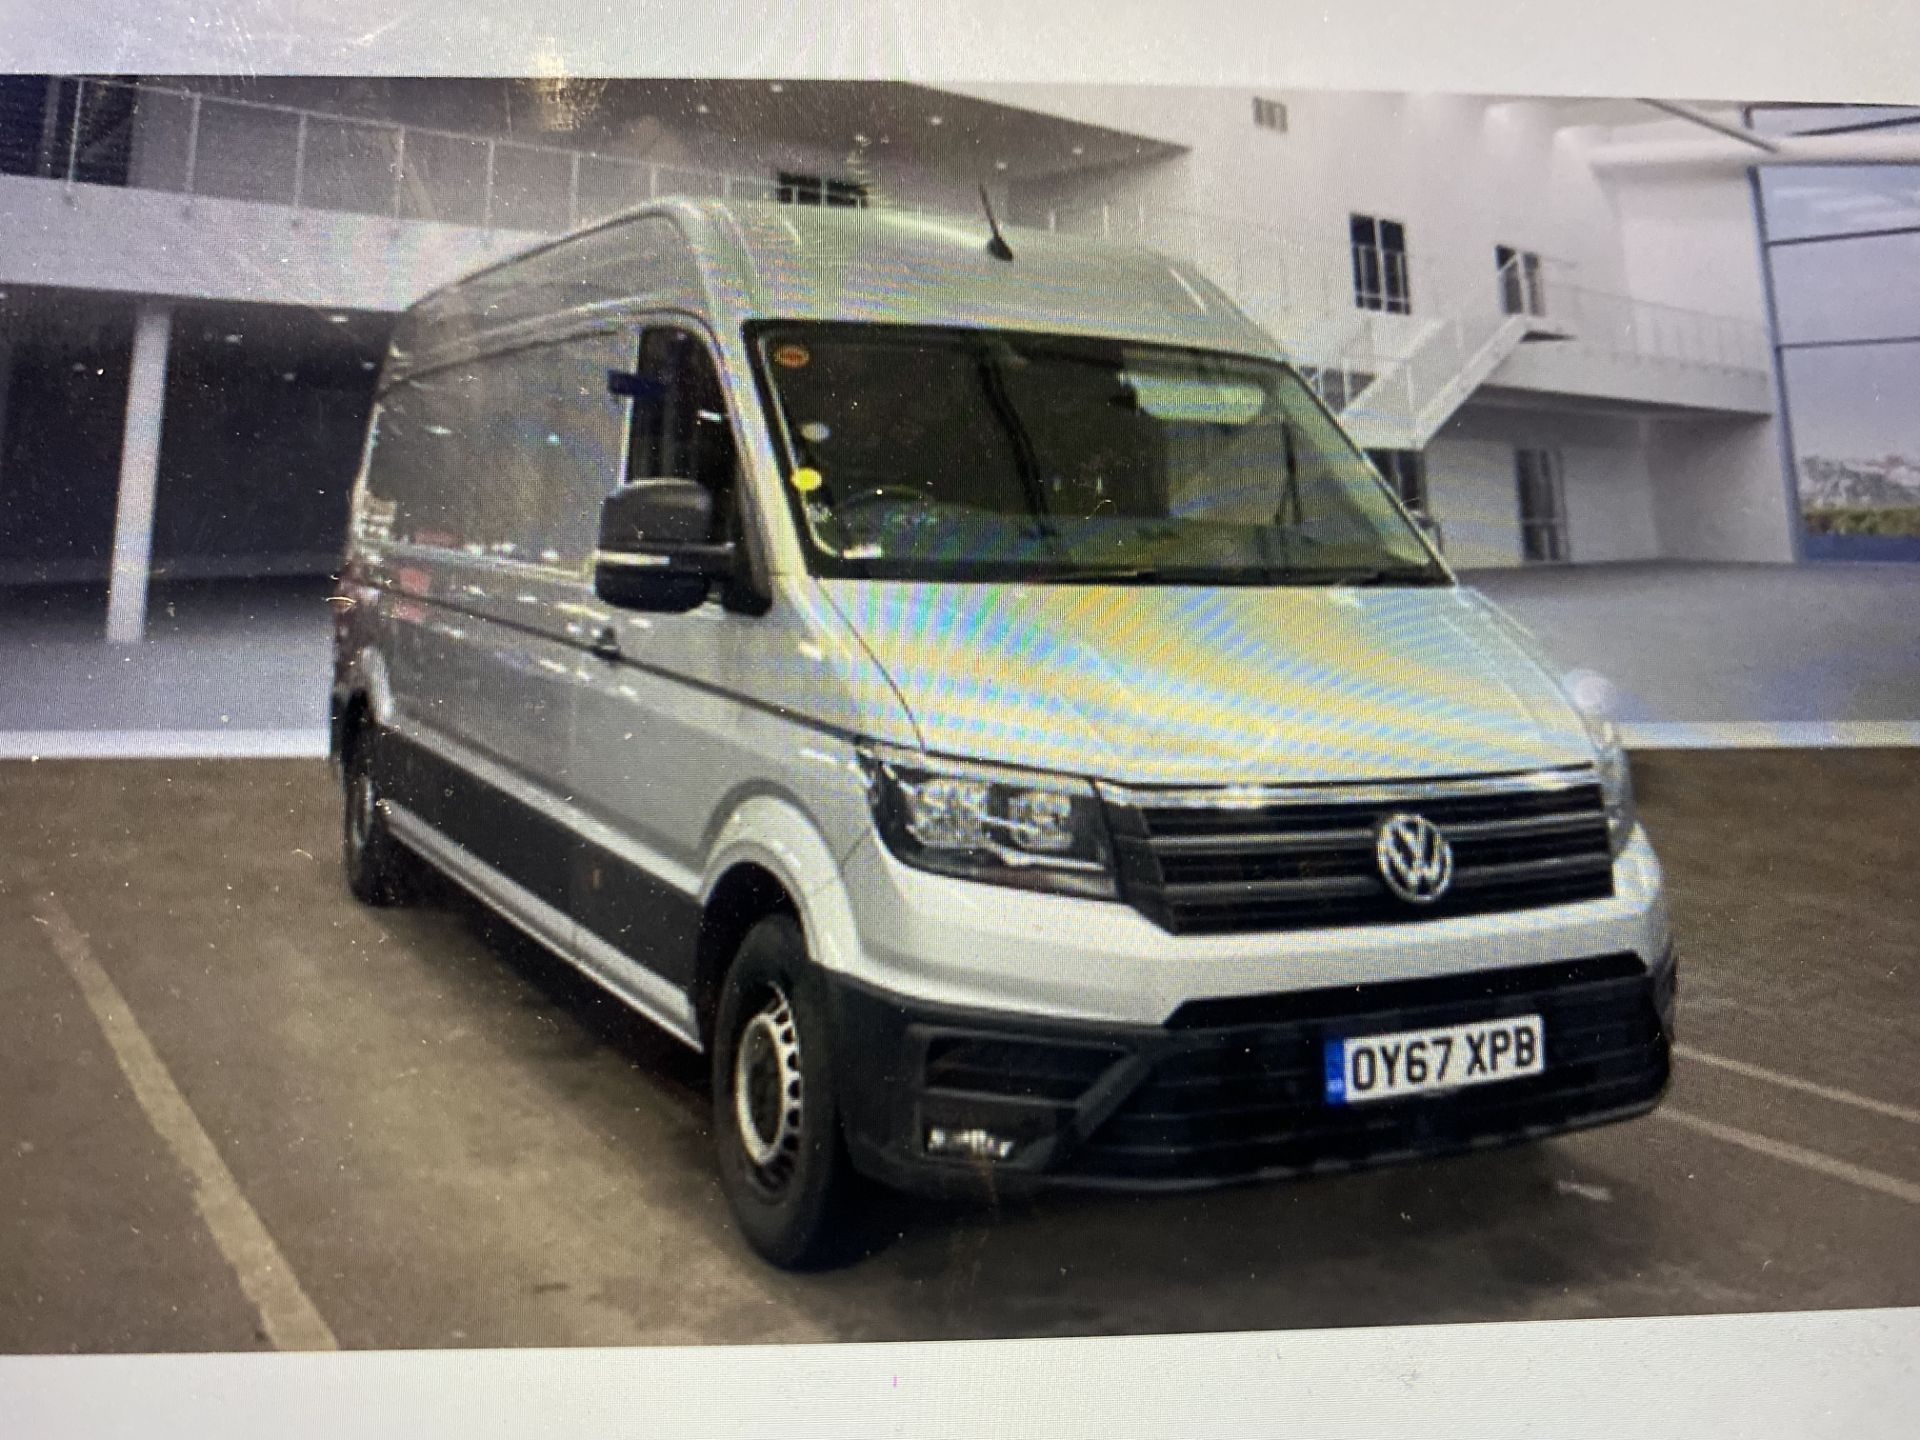 (ON SALE) VOLKSWAGON CRAFTER 2.0TDI "HIGHLINE" (180BHP) LONG WHEEL BASE HIGH ROOF - AIR CON - SILVER